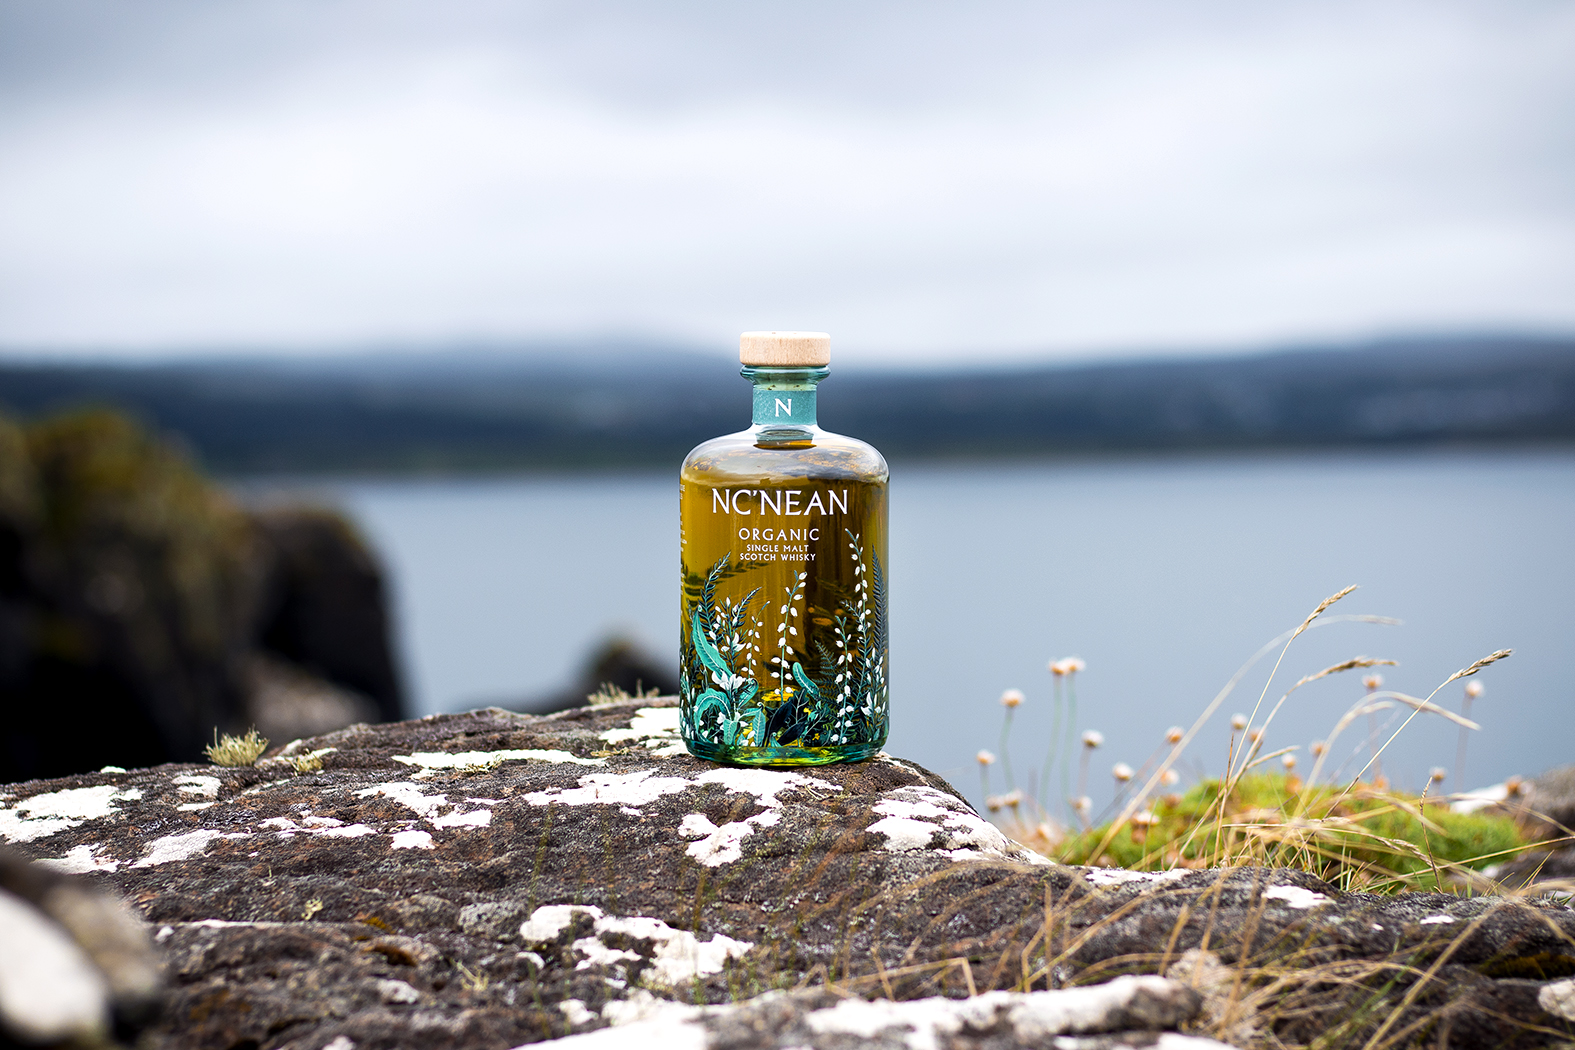 (A bottle of Nc'nean organic Scotch whisky) Besides its use of organic barley, Nc'nean uses bottles made of 100% recycled material